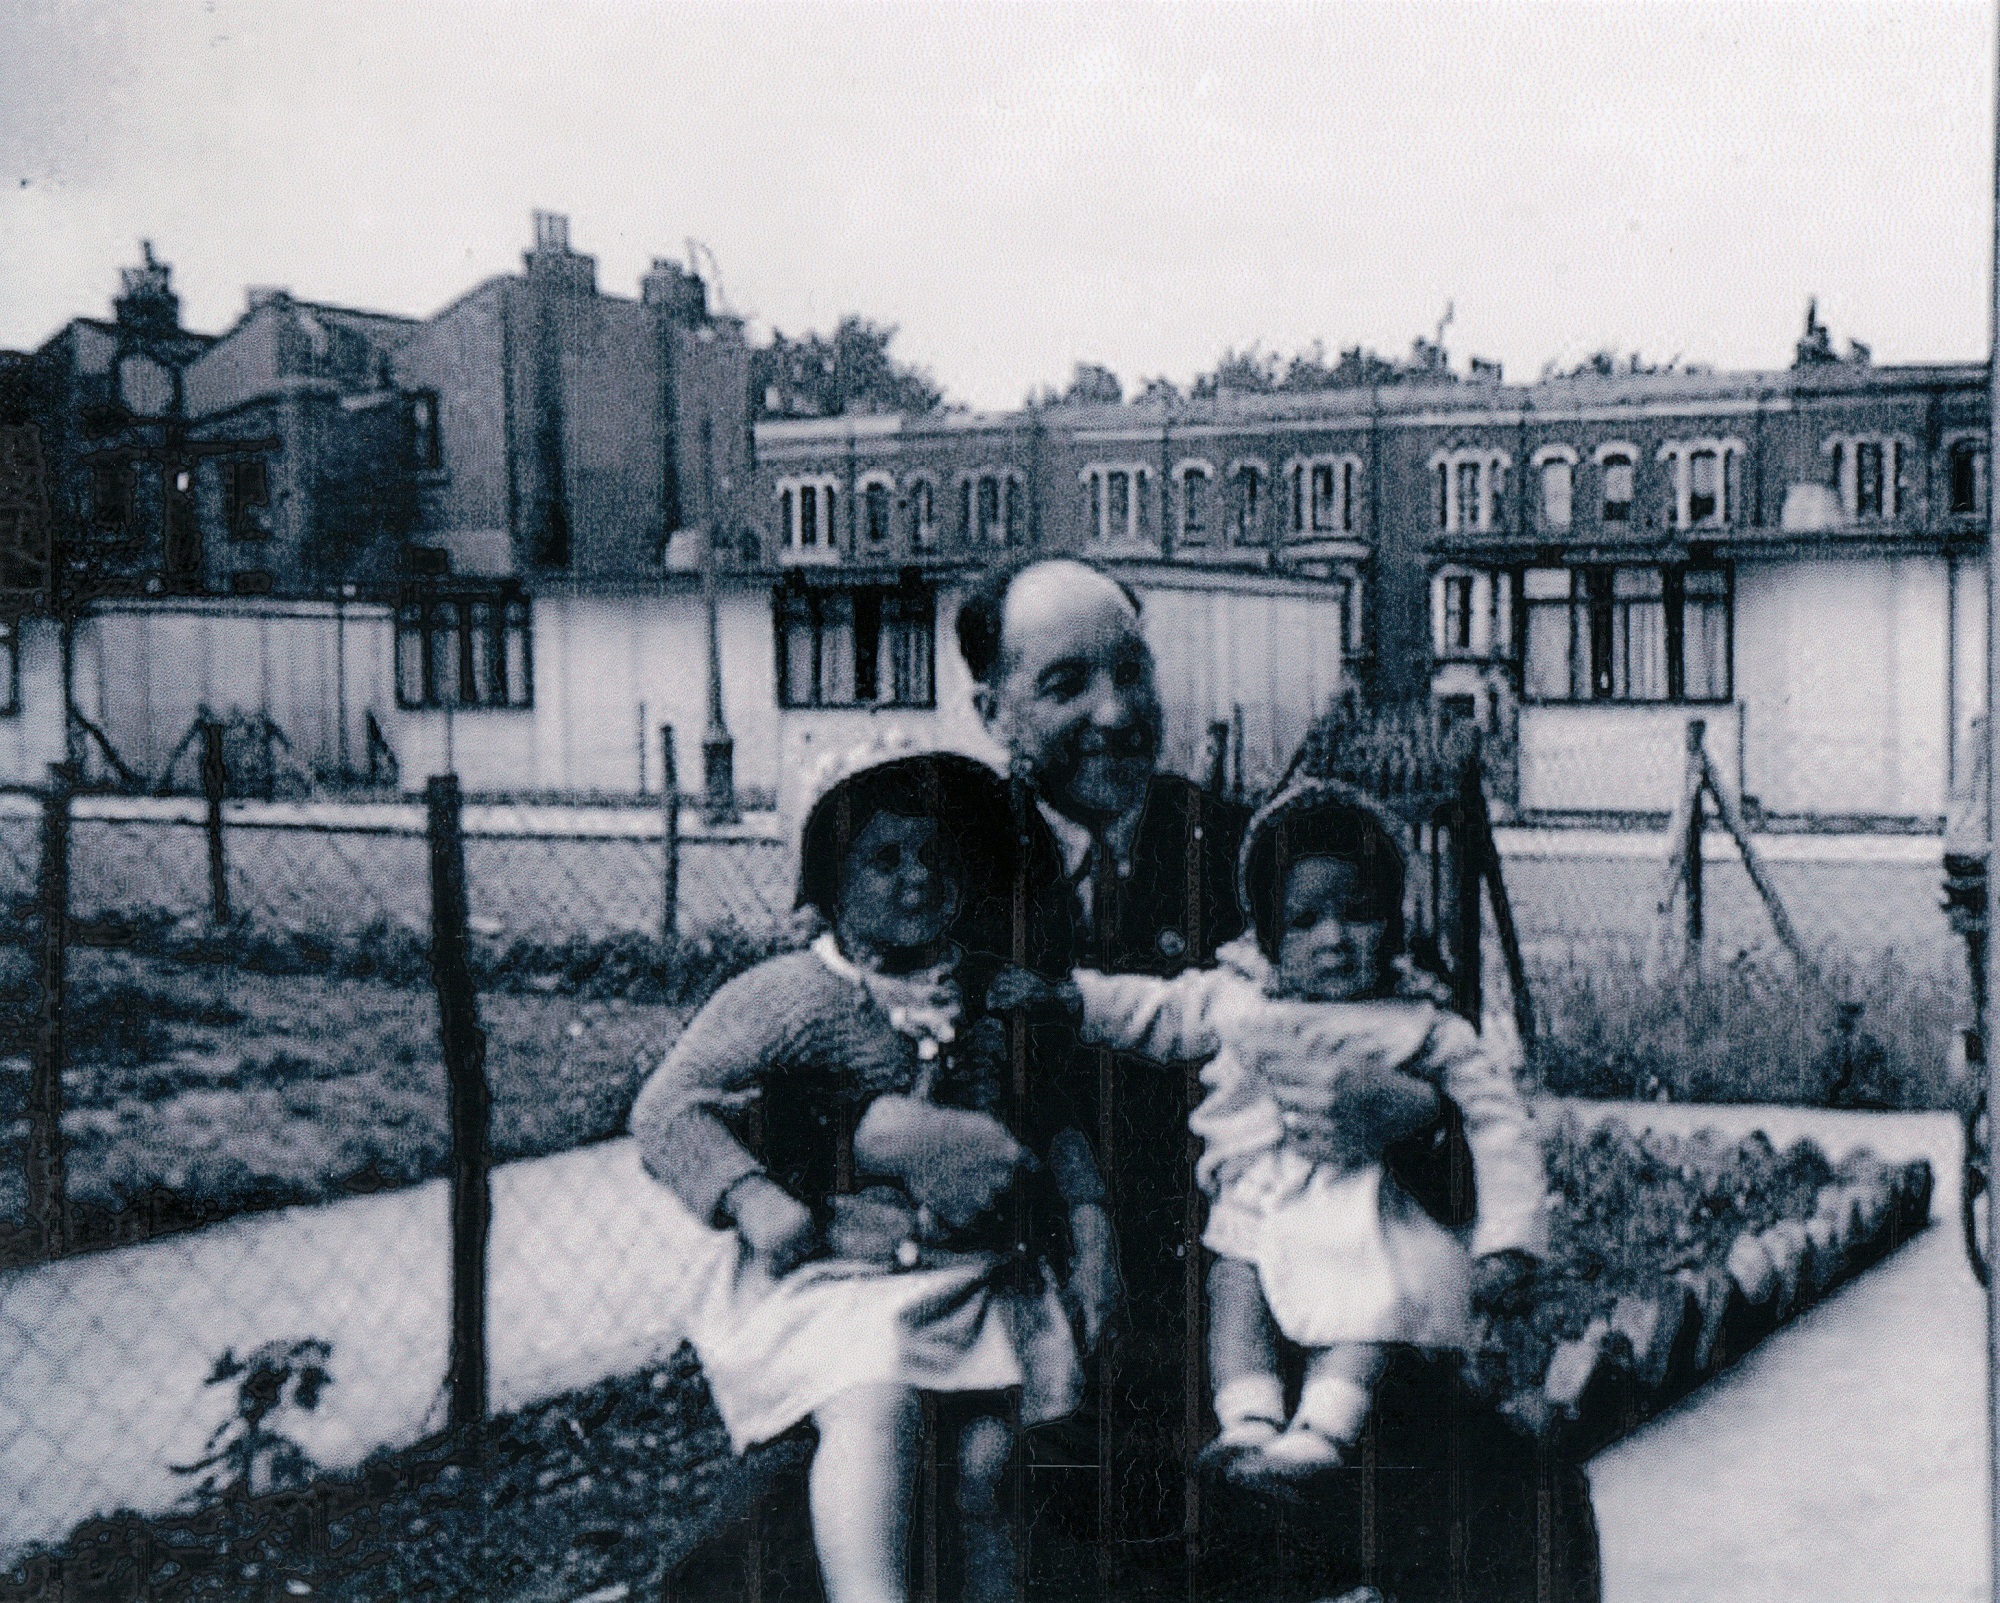 George Rennie with his two daughters Judy and Naomi. St Lawrence Road, Brixton